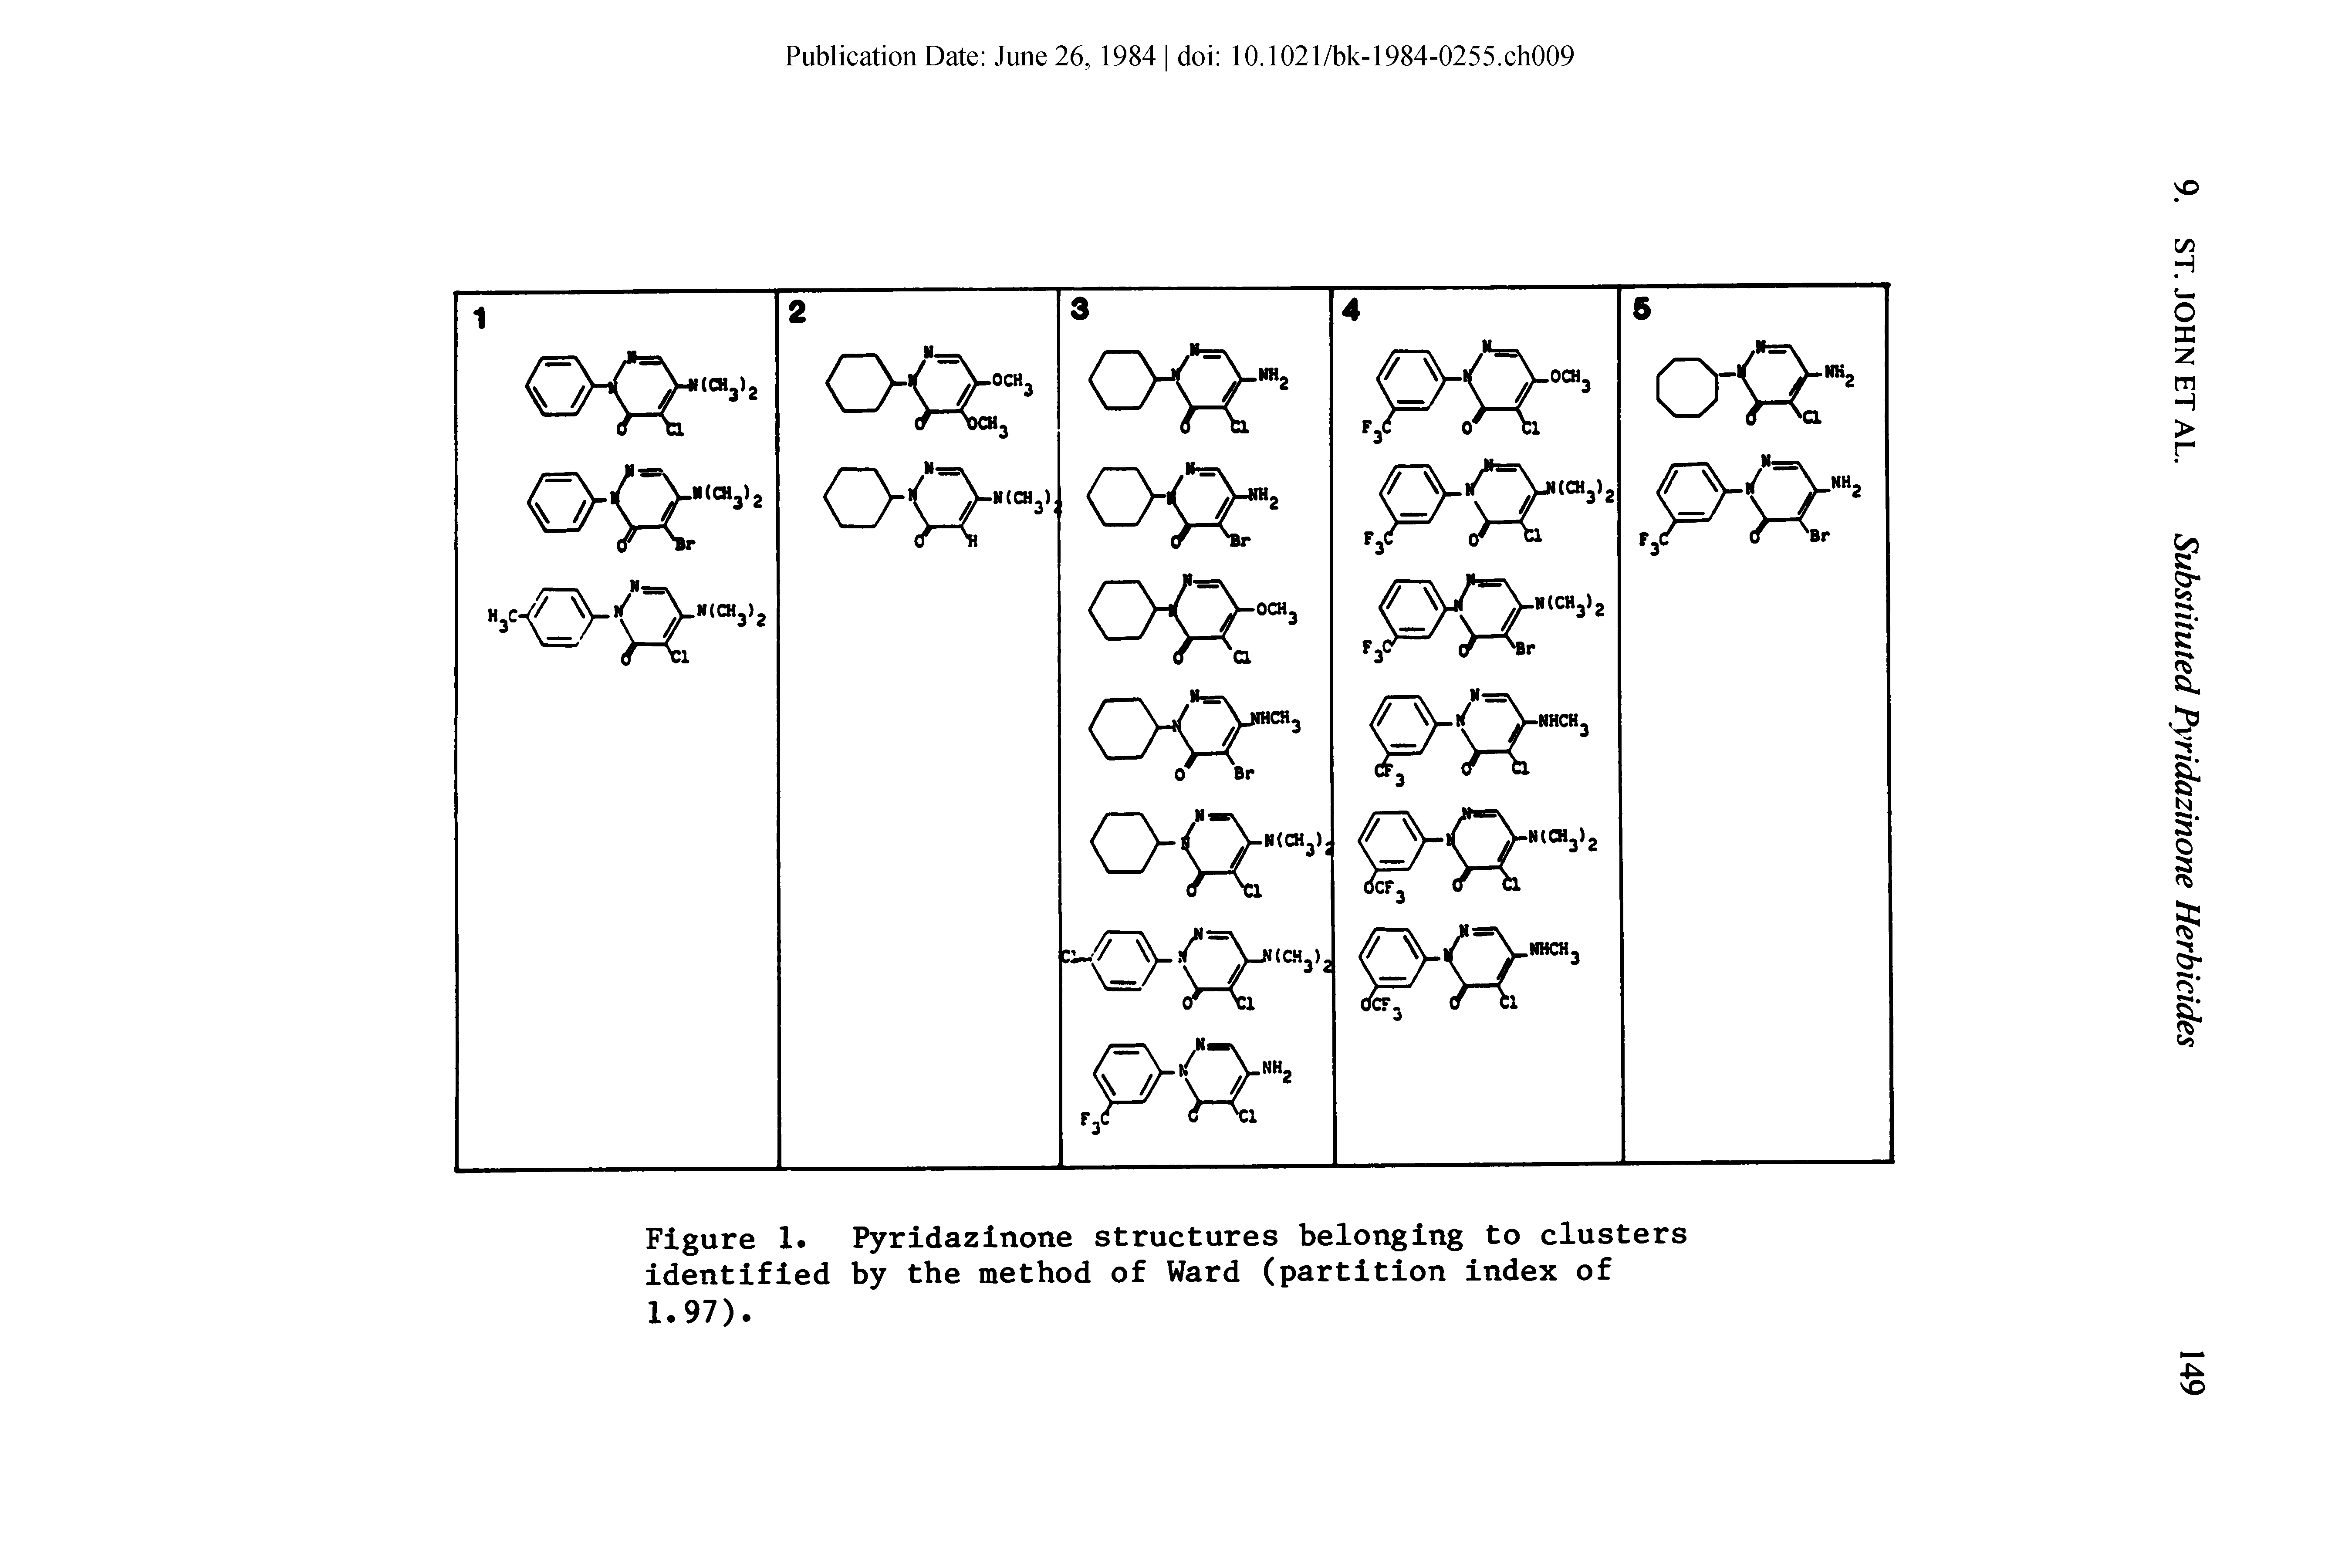 Figure 1. Pyridazinone structures belonging to clusters identified by the method of Ward (partition index of 1.97).